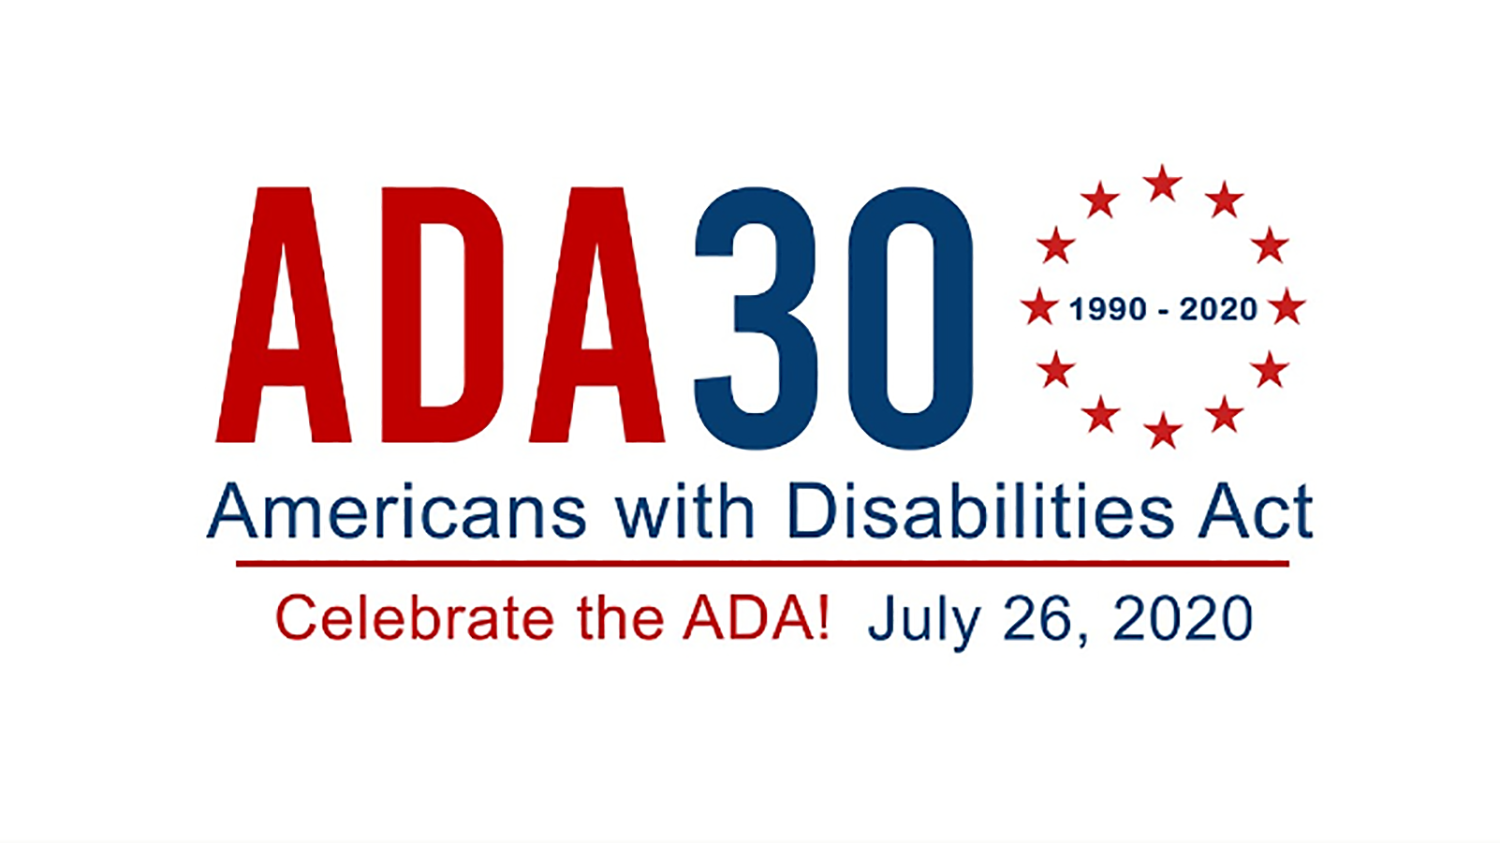 Americans with Disabilities Act 30th Anniversary